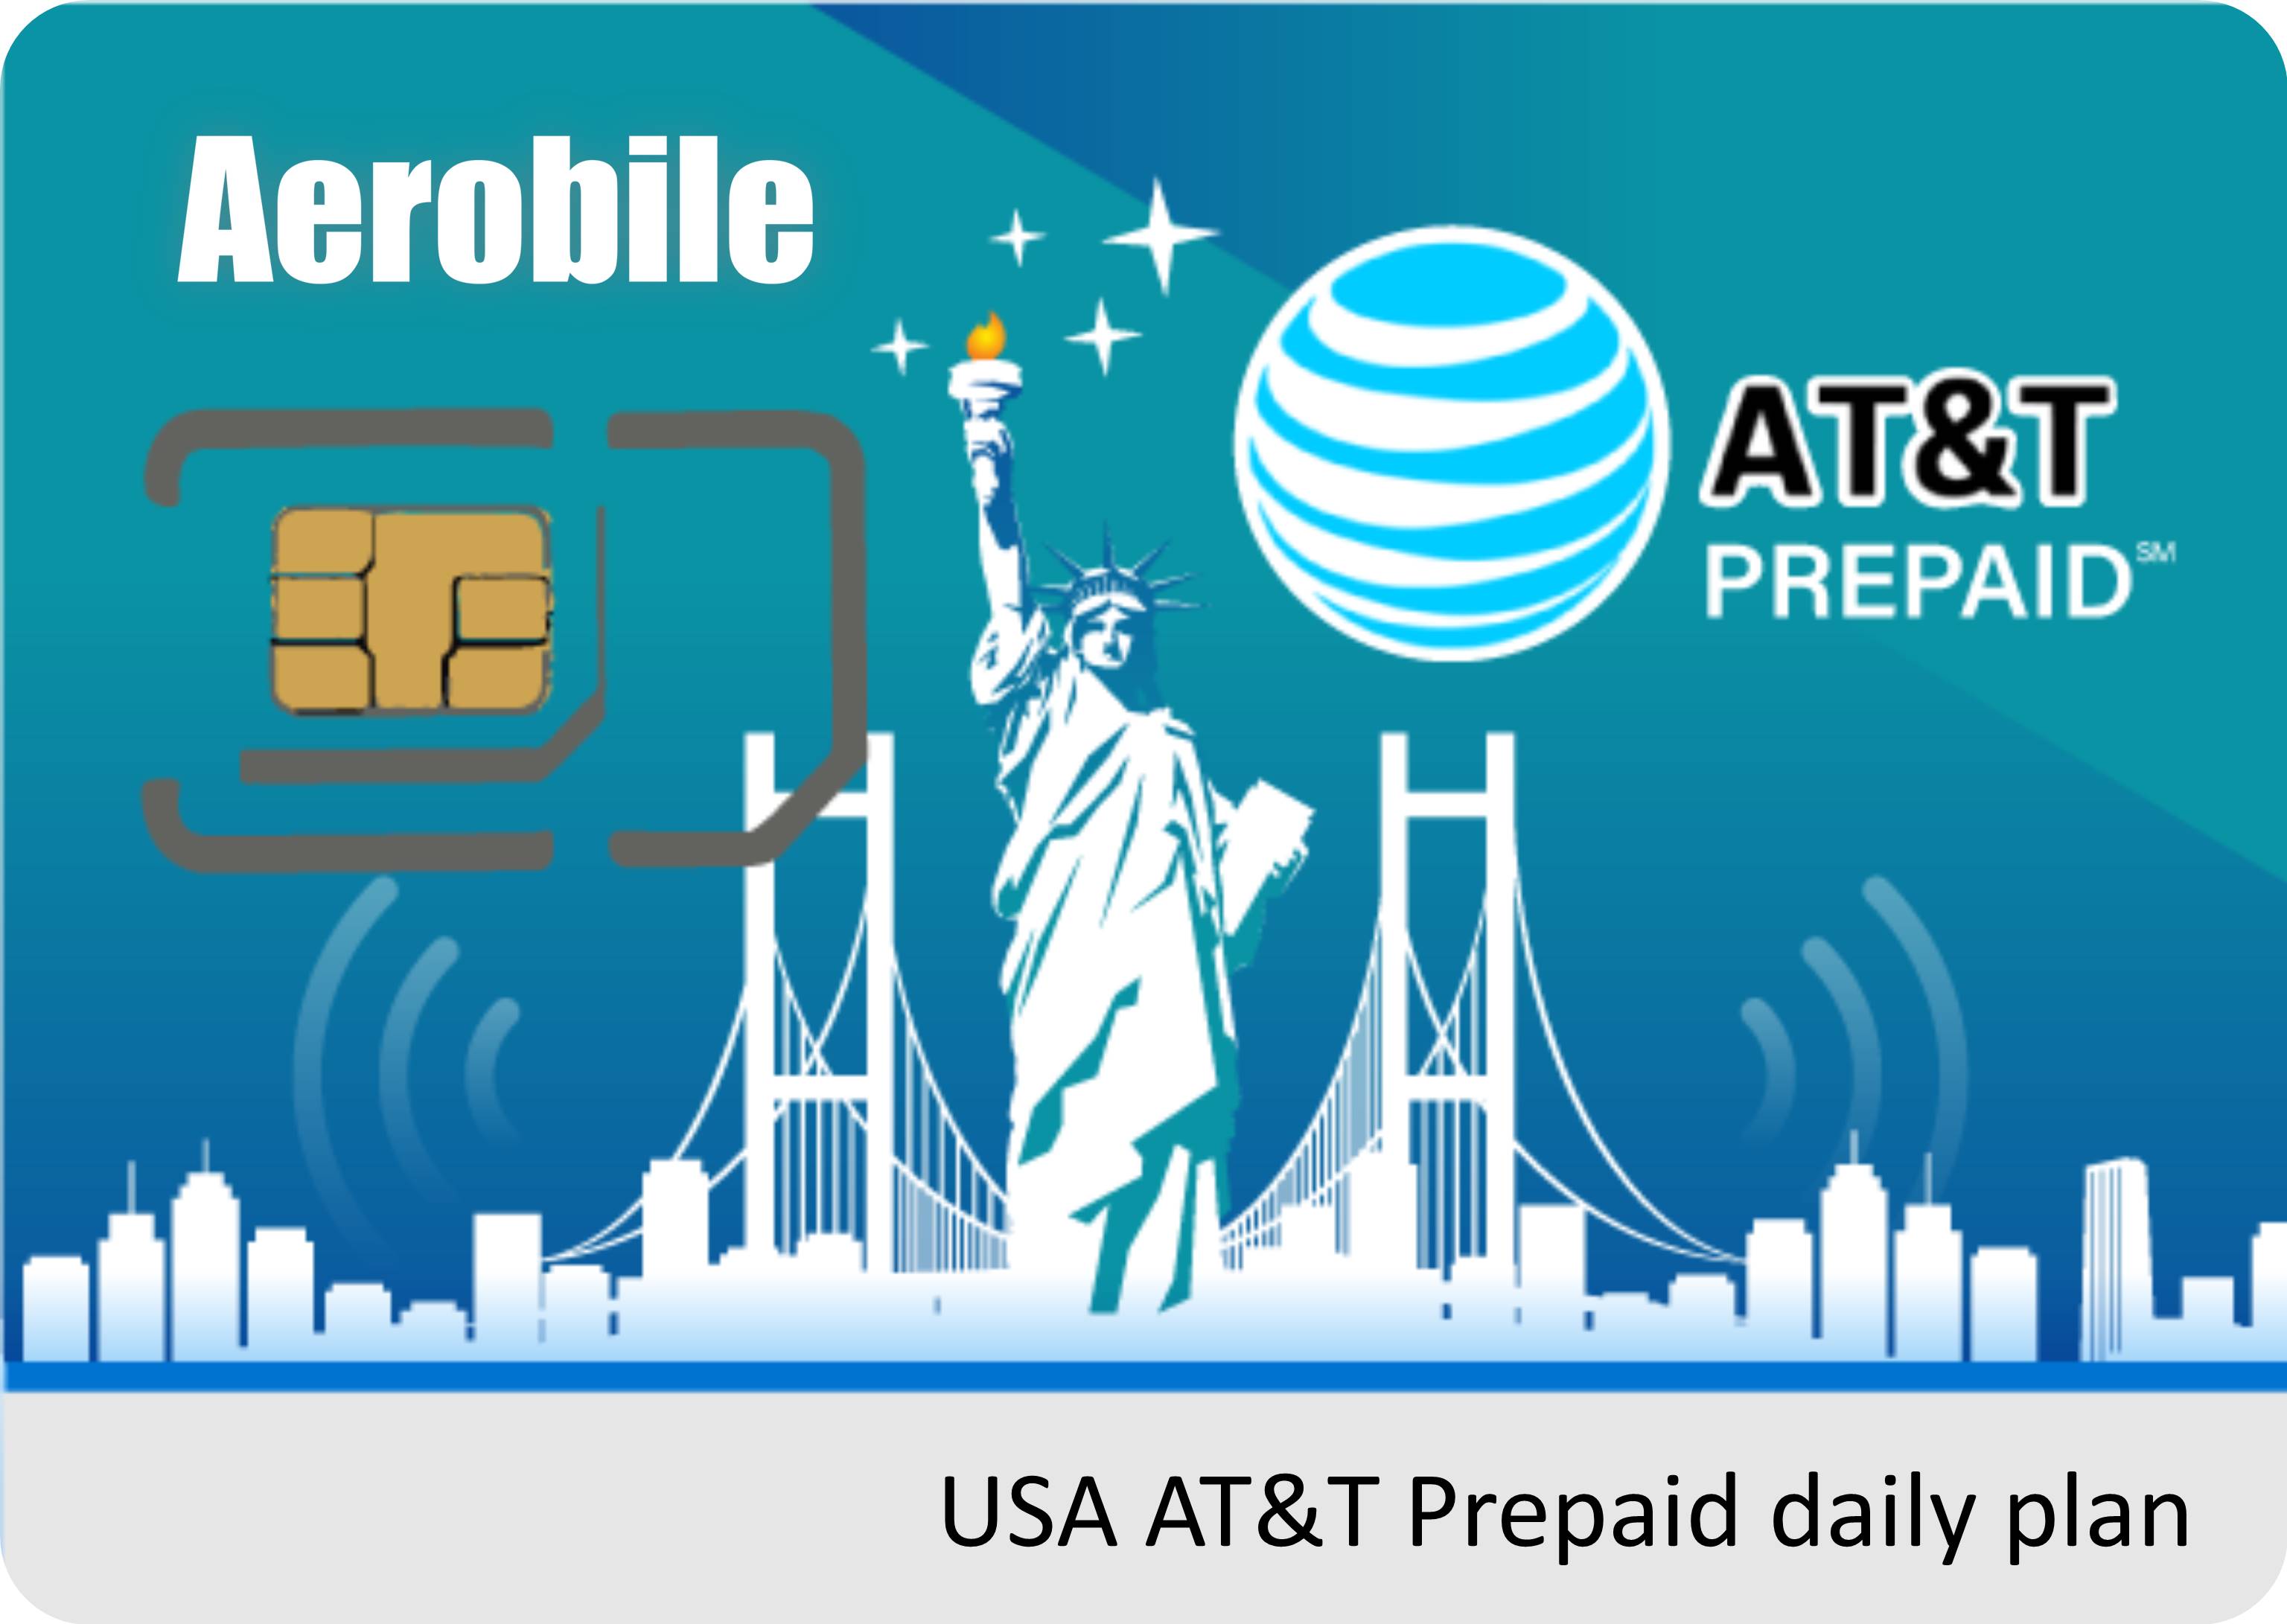 eSIM-AT&T Prepaid daily plan (unlimited high speed data)